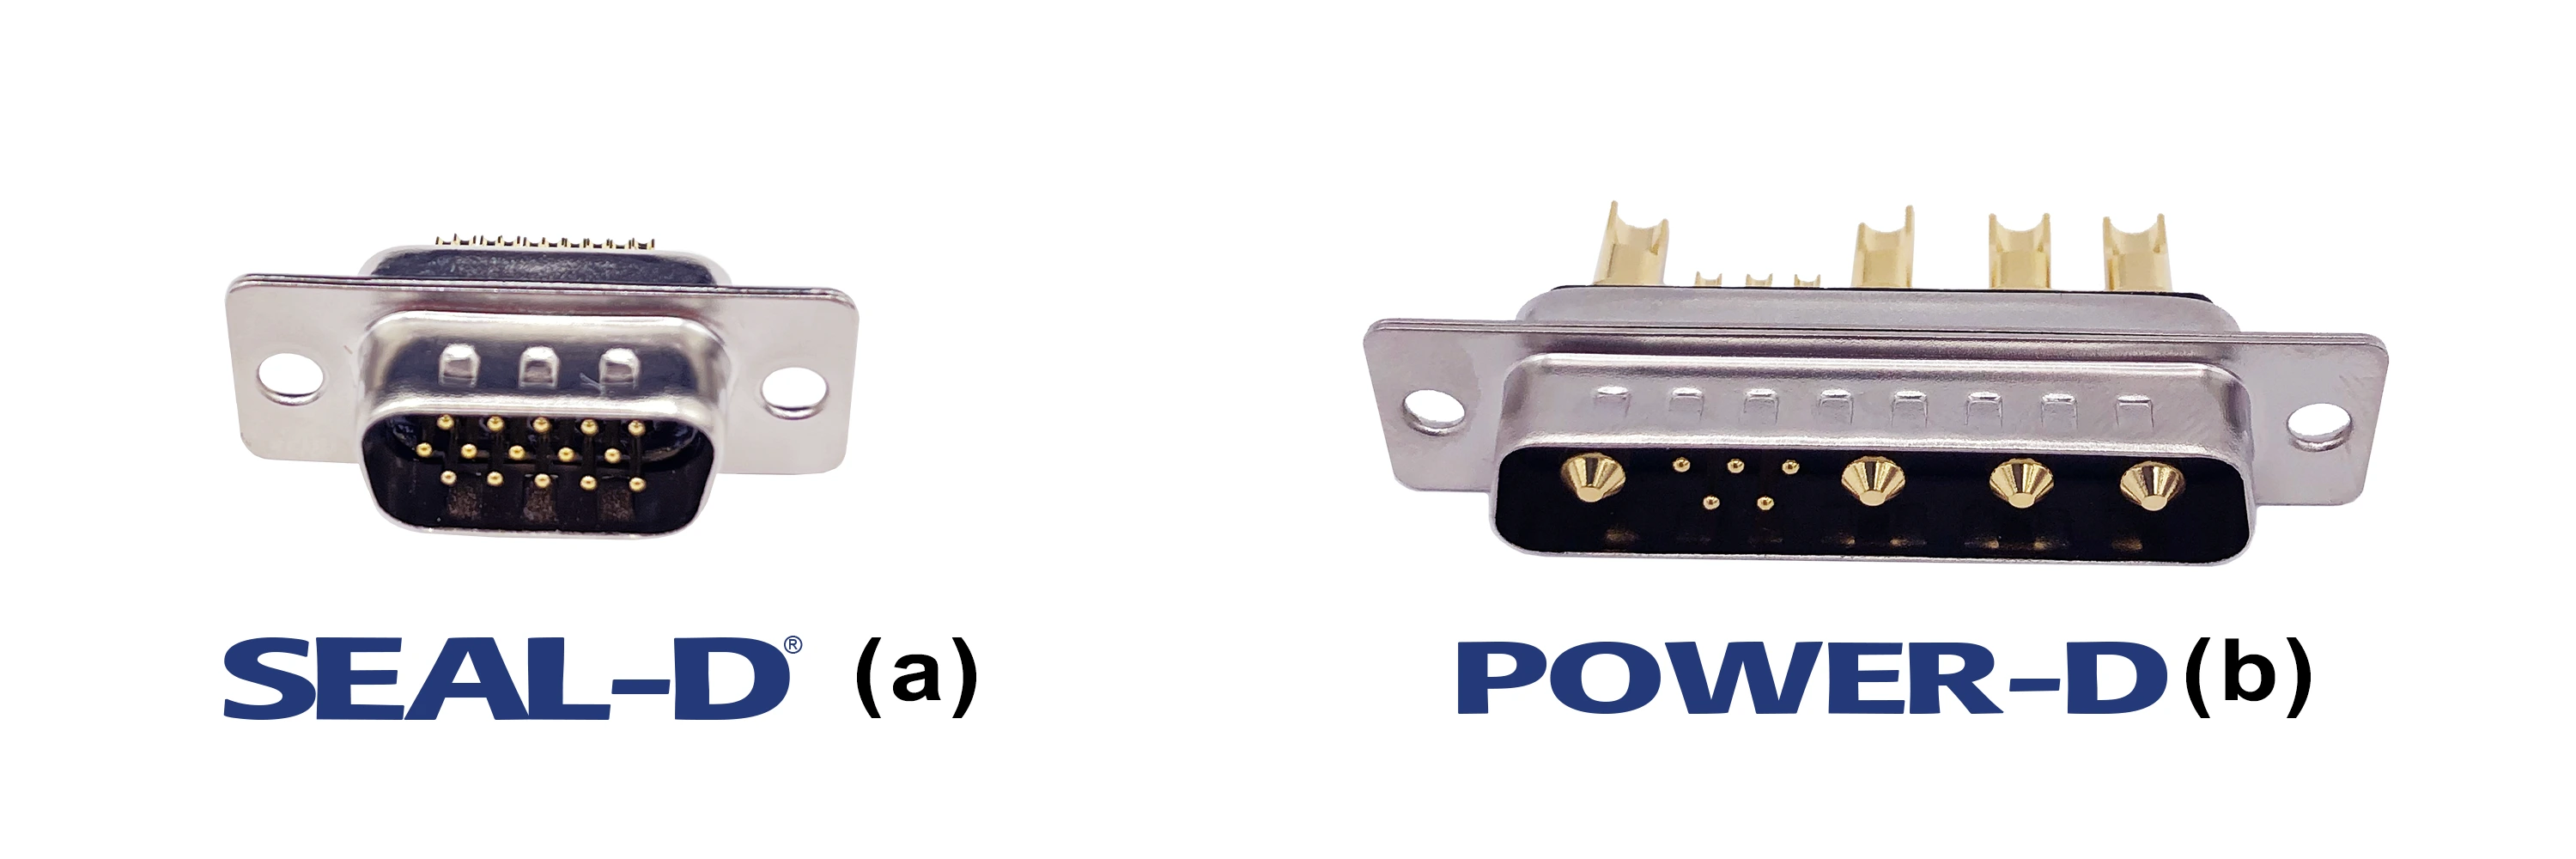 Figure 3: SEAL-D® and Combo-D IP-rated d-sub connectors (Source: NorComp)